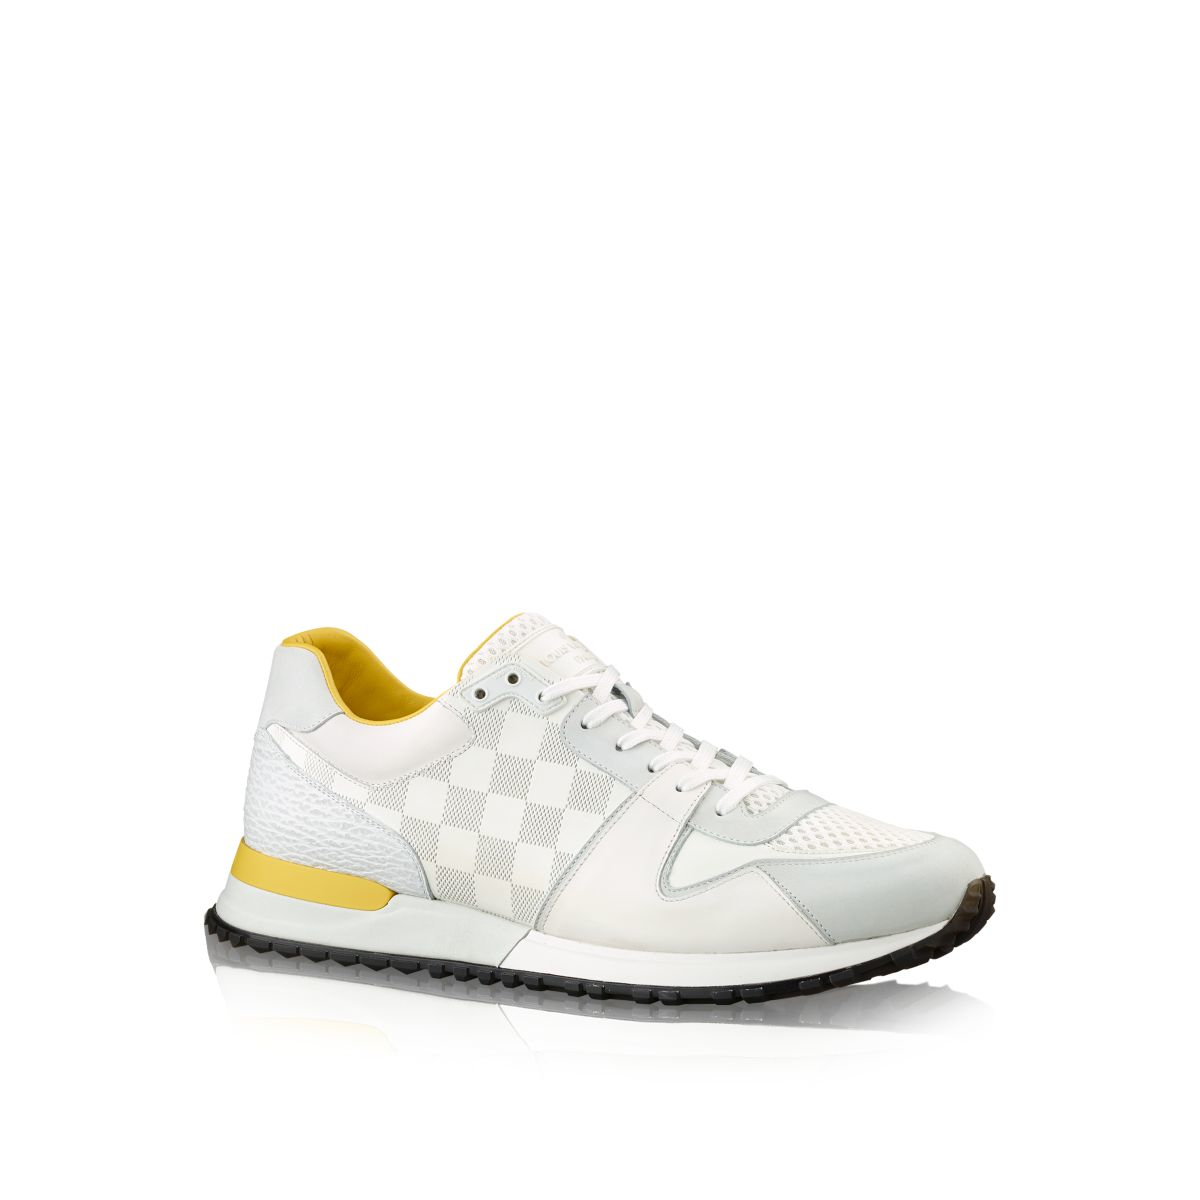 Mens Louis Vuitton Run Away Sneakers | Confederated Tribes of the Umatilla Indian Reservation